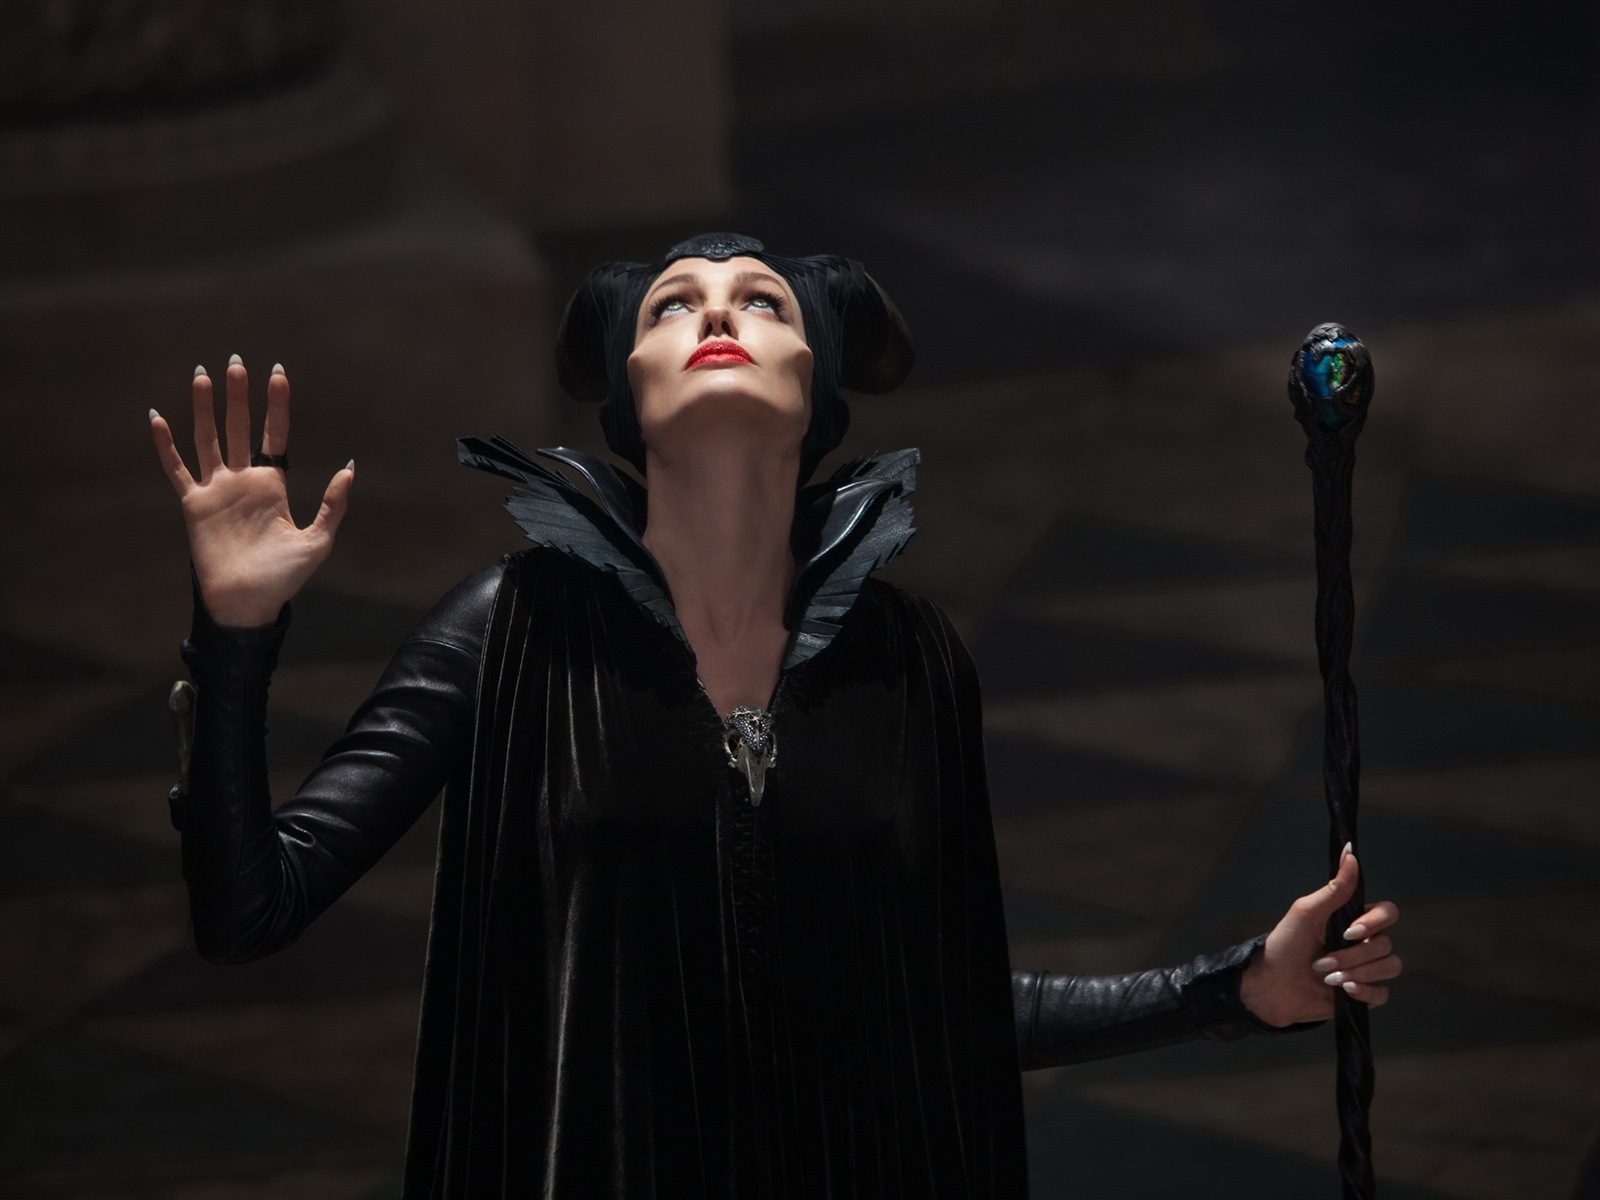 Maleficent 2014 HD movie wallpapers #4 - 1600x1200